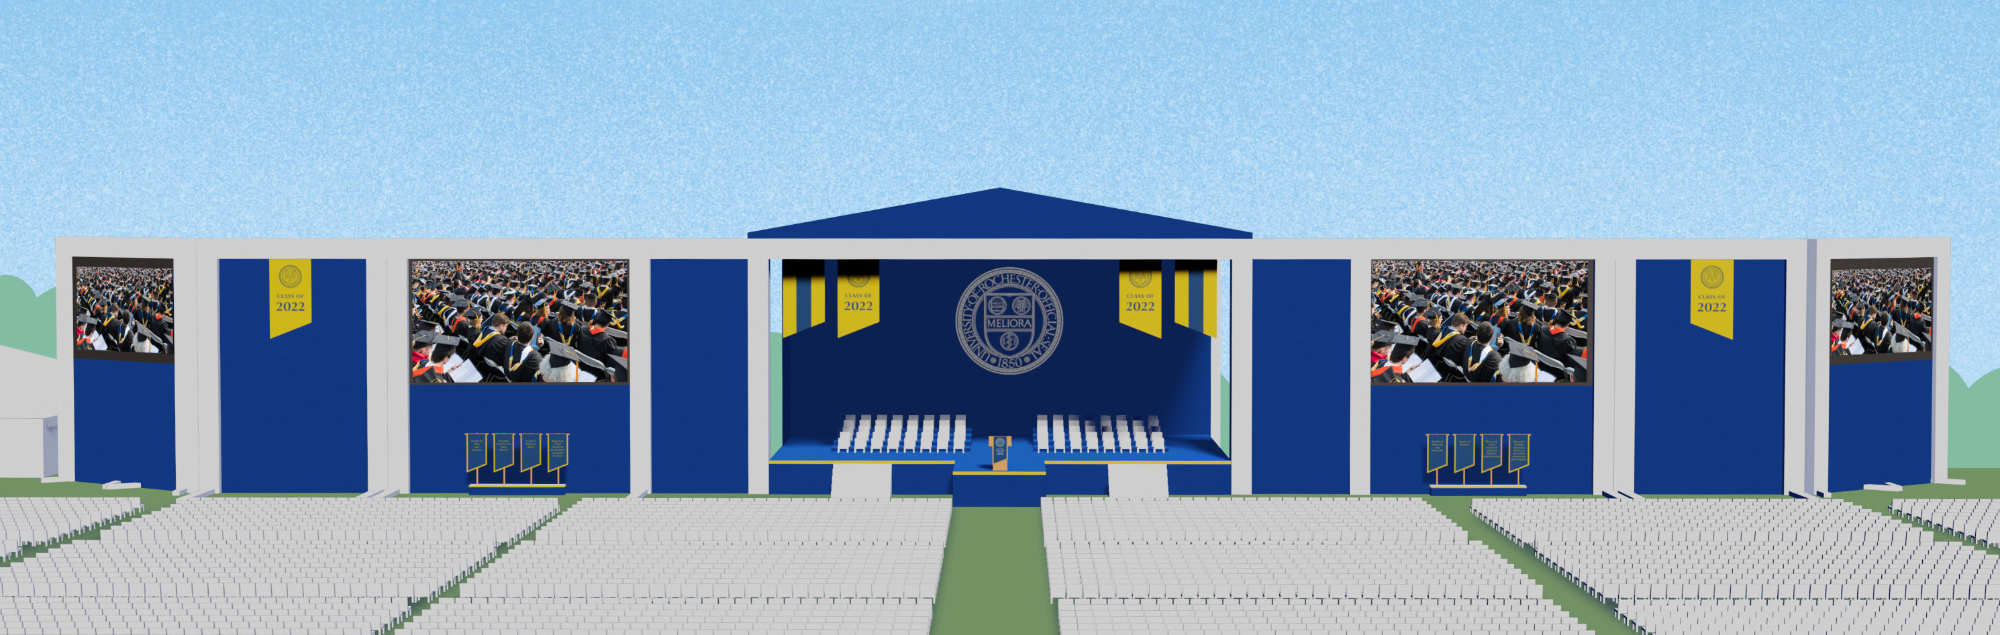 Artist's digital rendering of the commencement stage, screens, and seating.